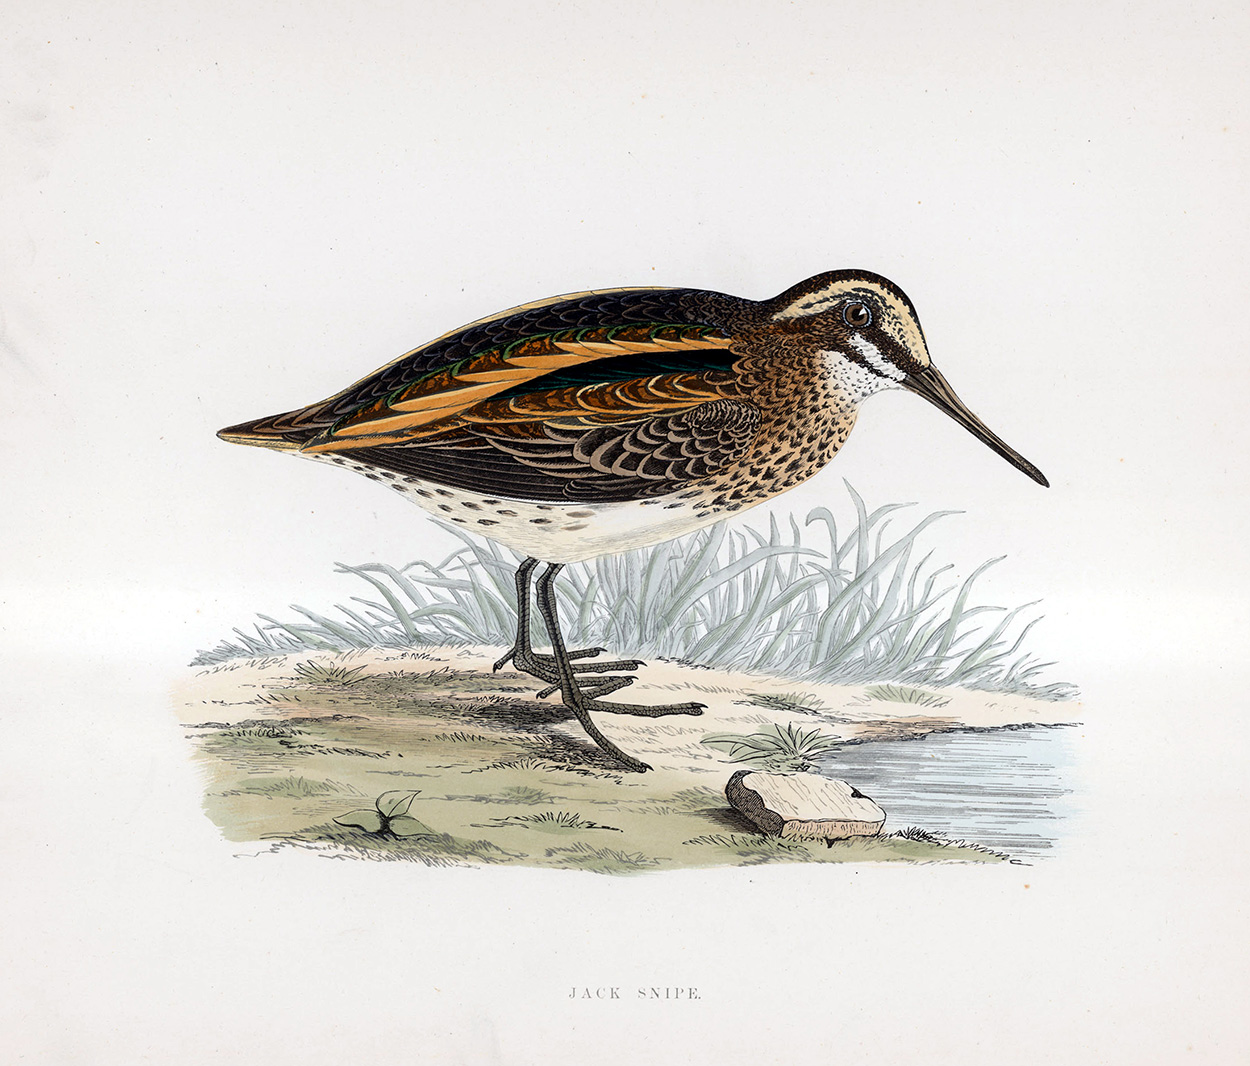 Jack Snipe - hand coloured lithograph 1891 (Print) art by Beverley R Morris at The Illustration Art Gallery